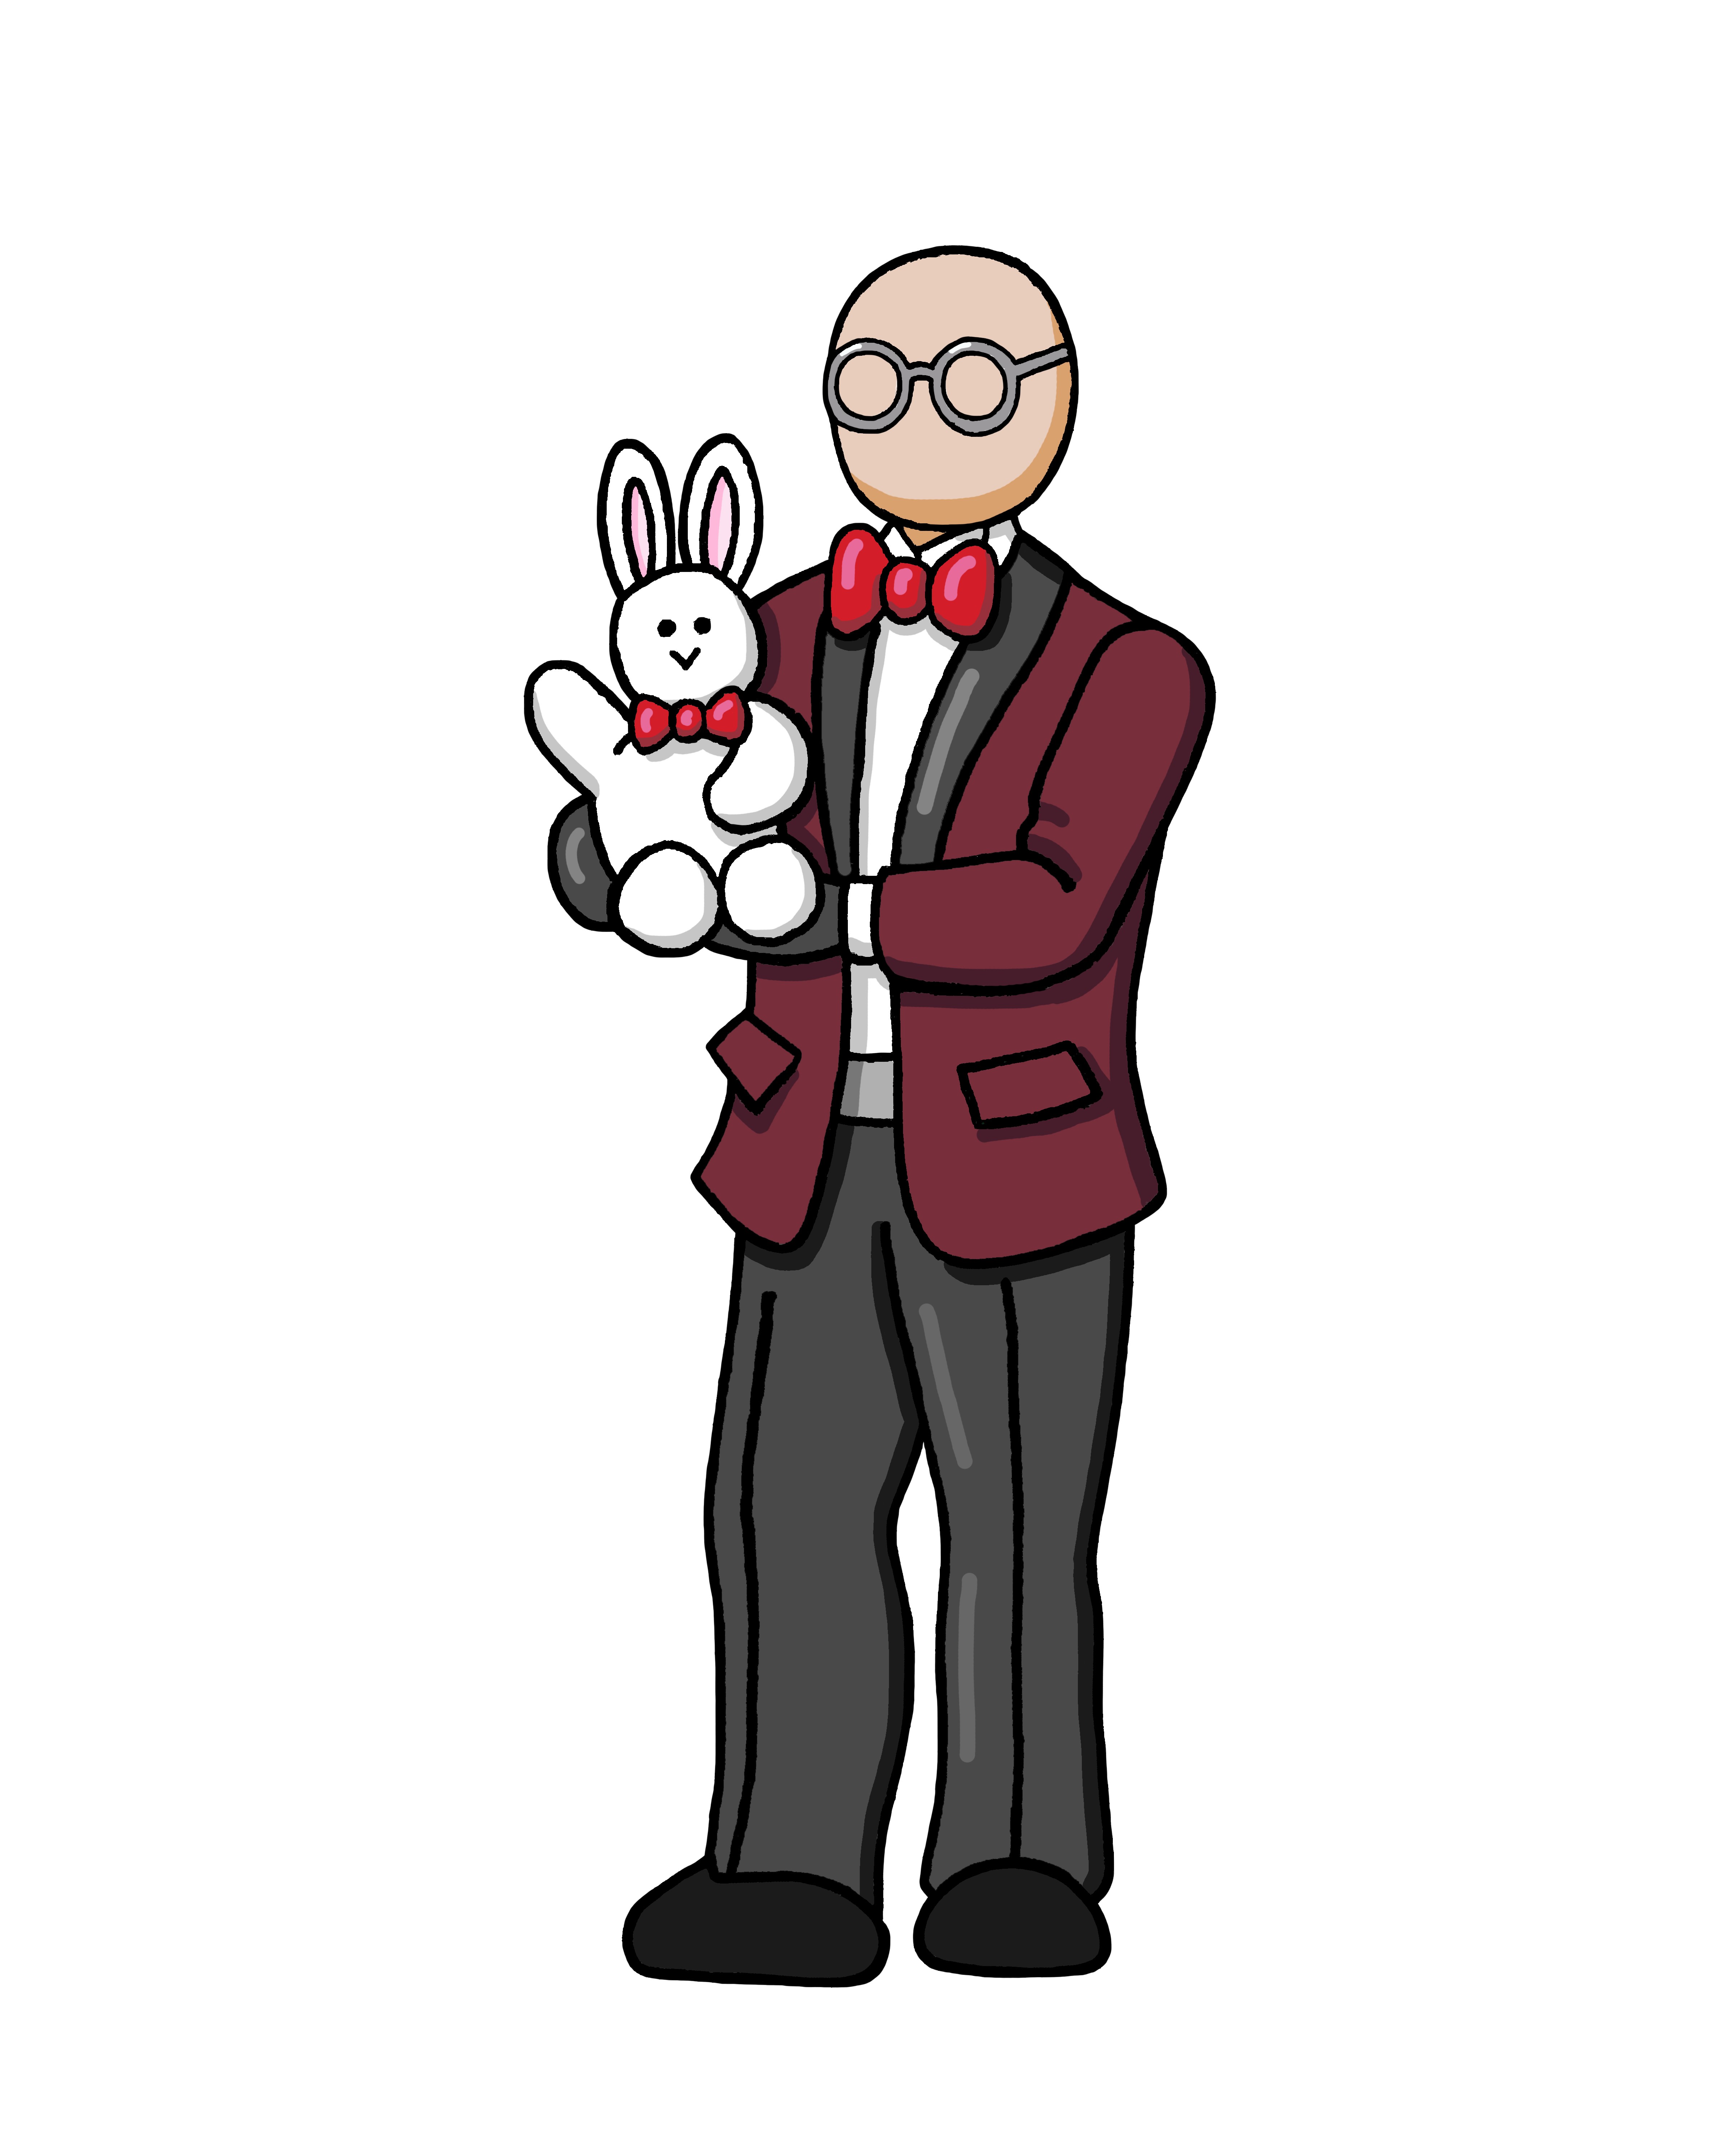 Stew the Rabbit and me in cartoon form